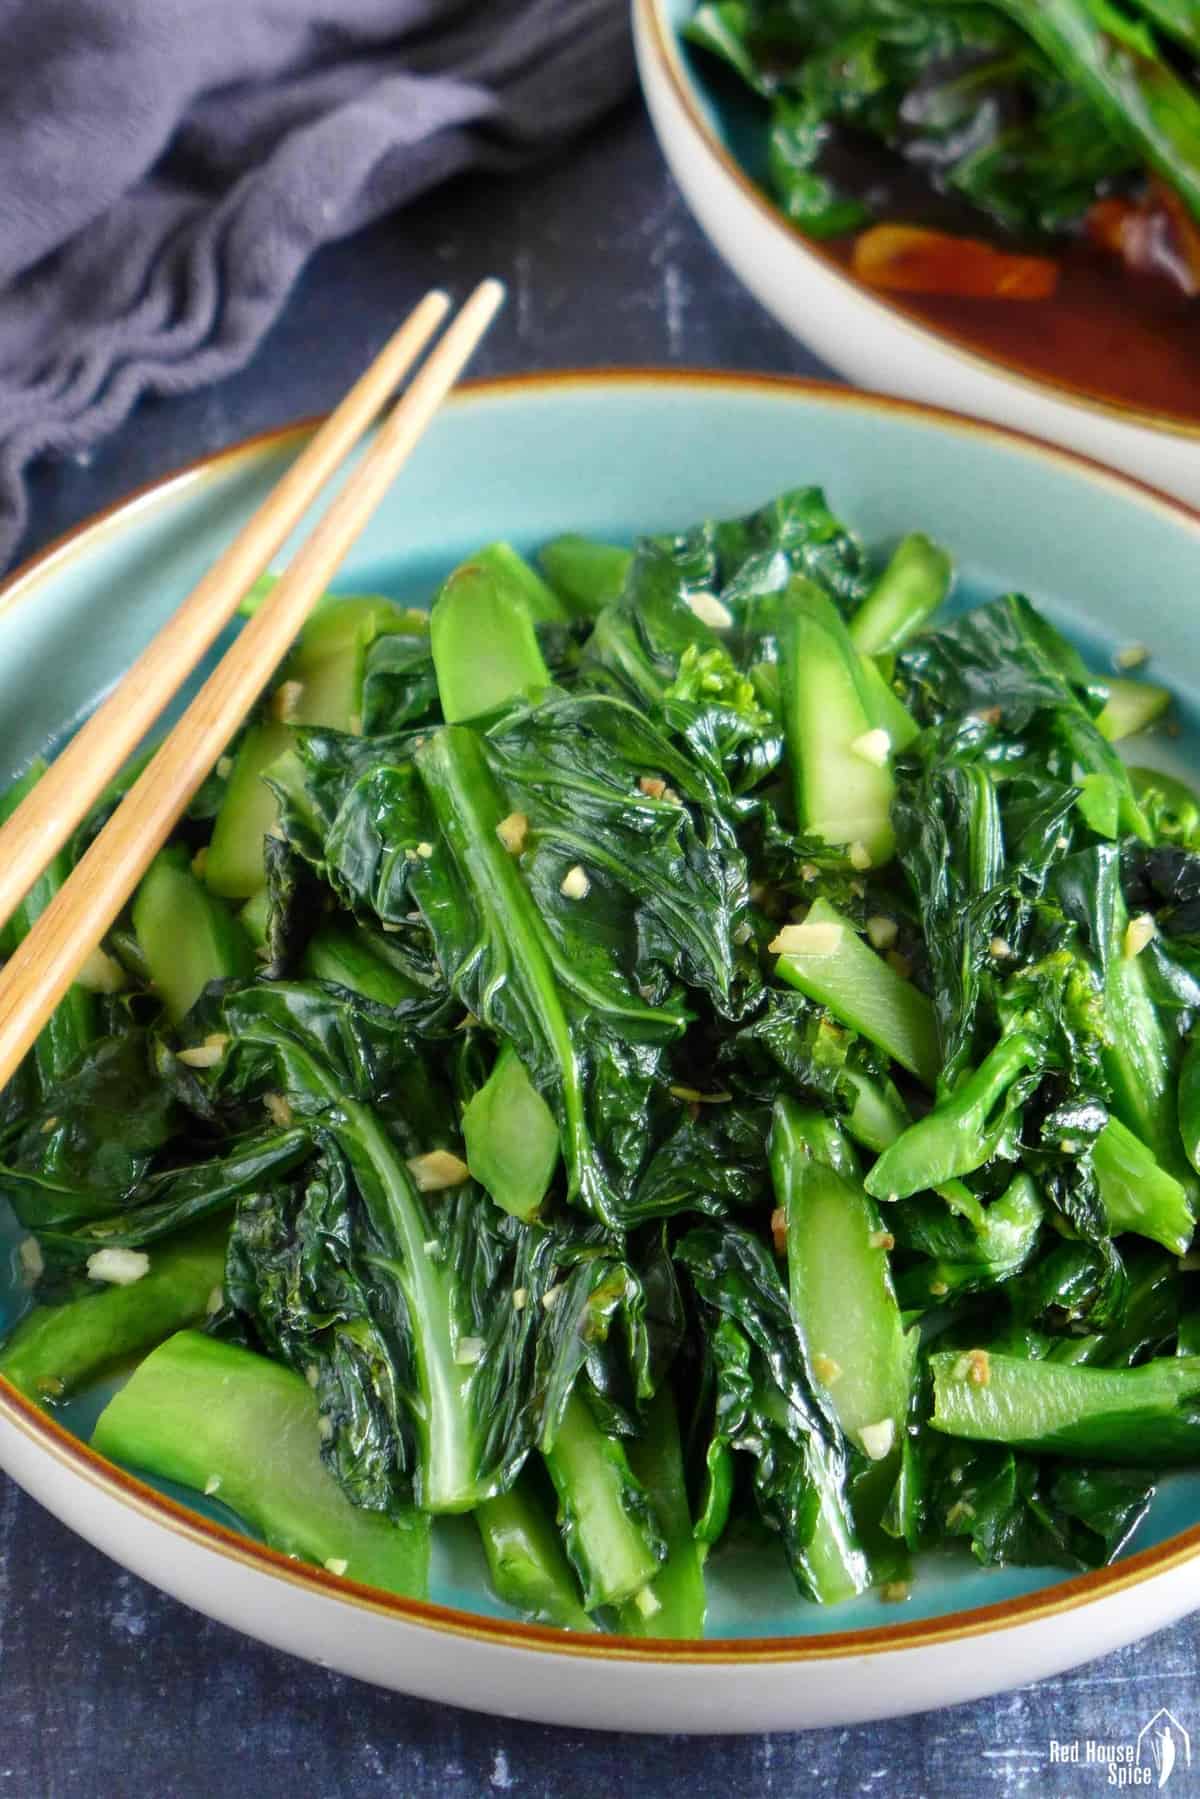 A plate of stir-fried Chinese broccoli with ginger and garlic.